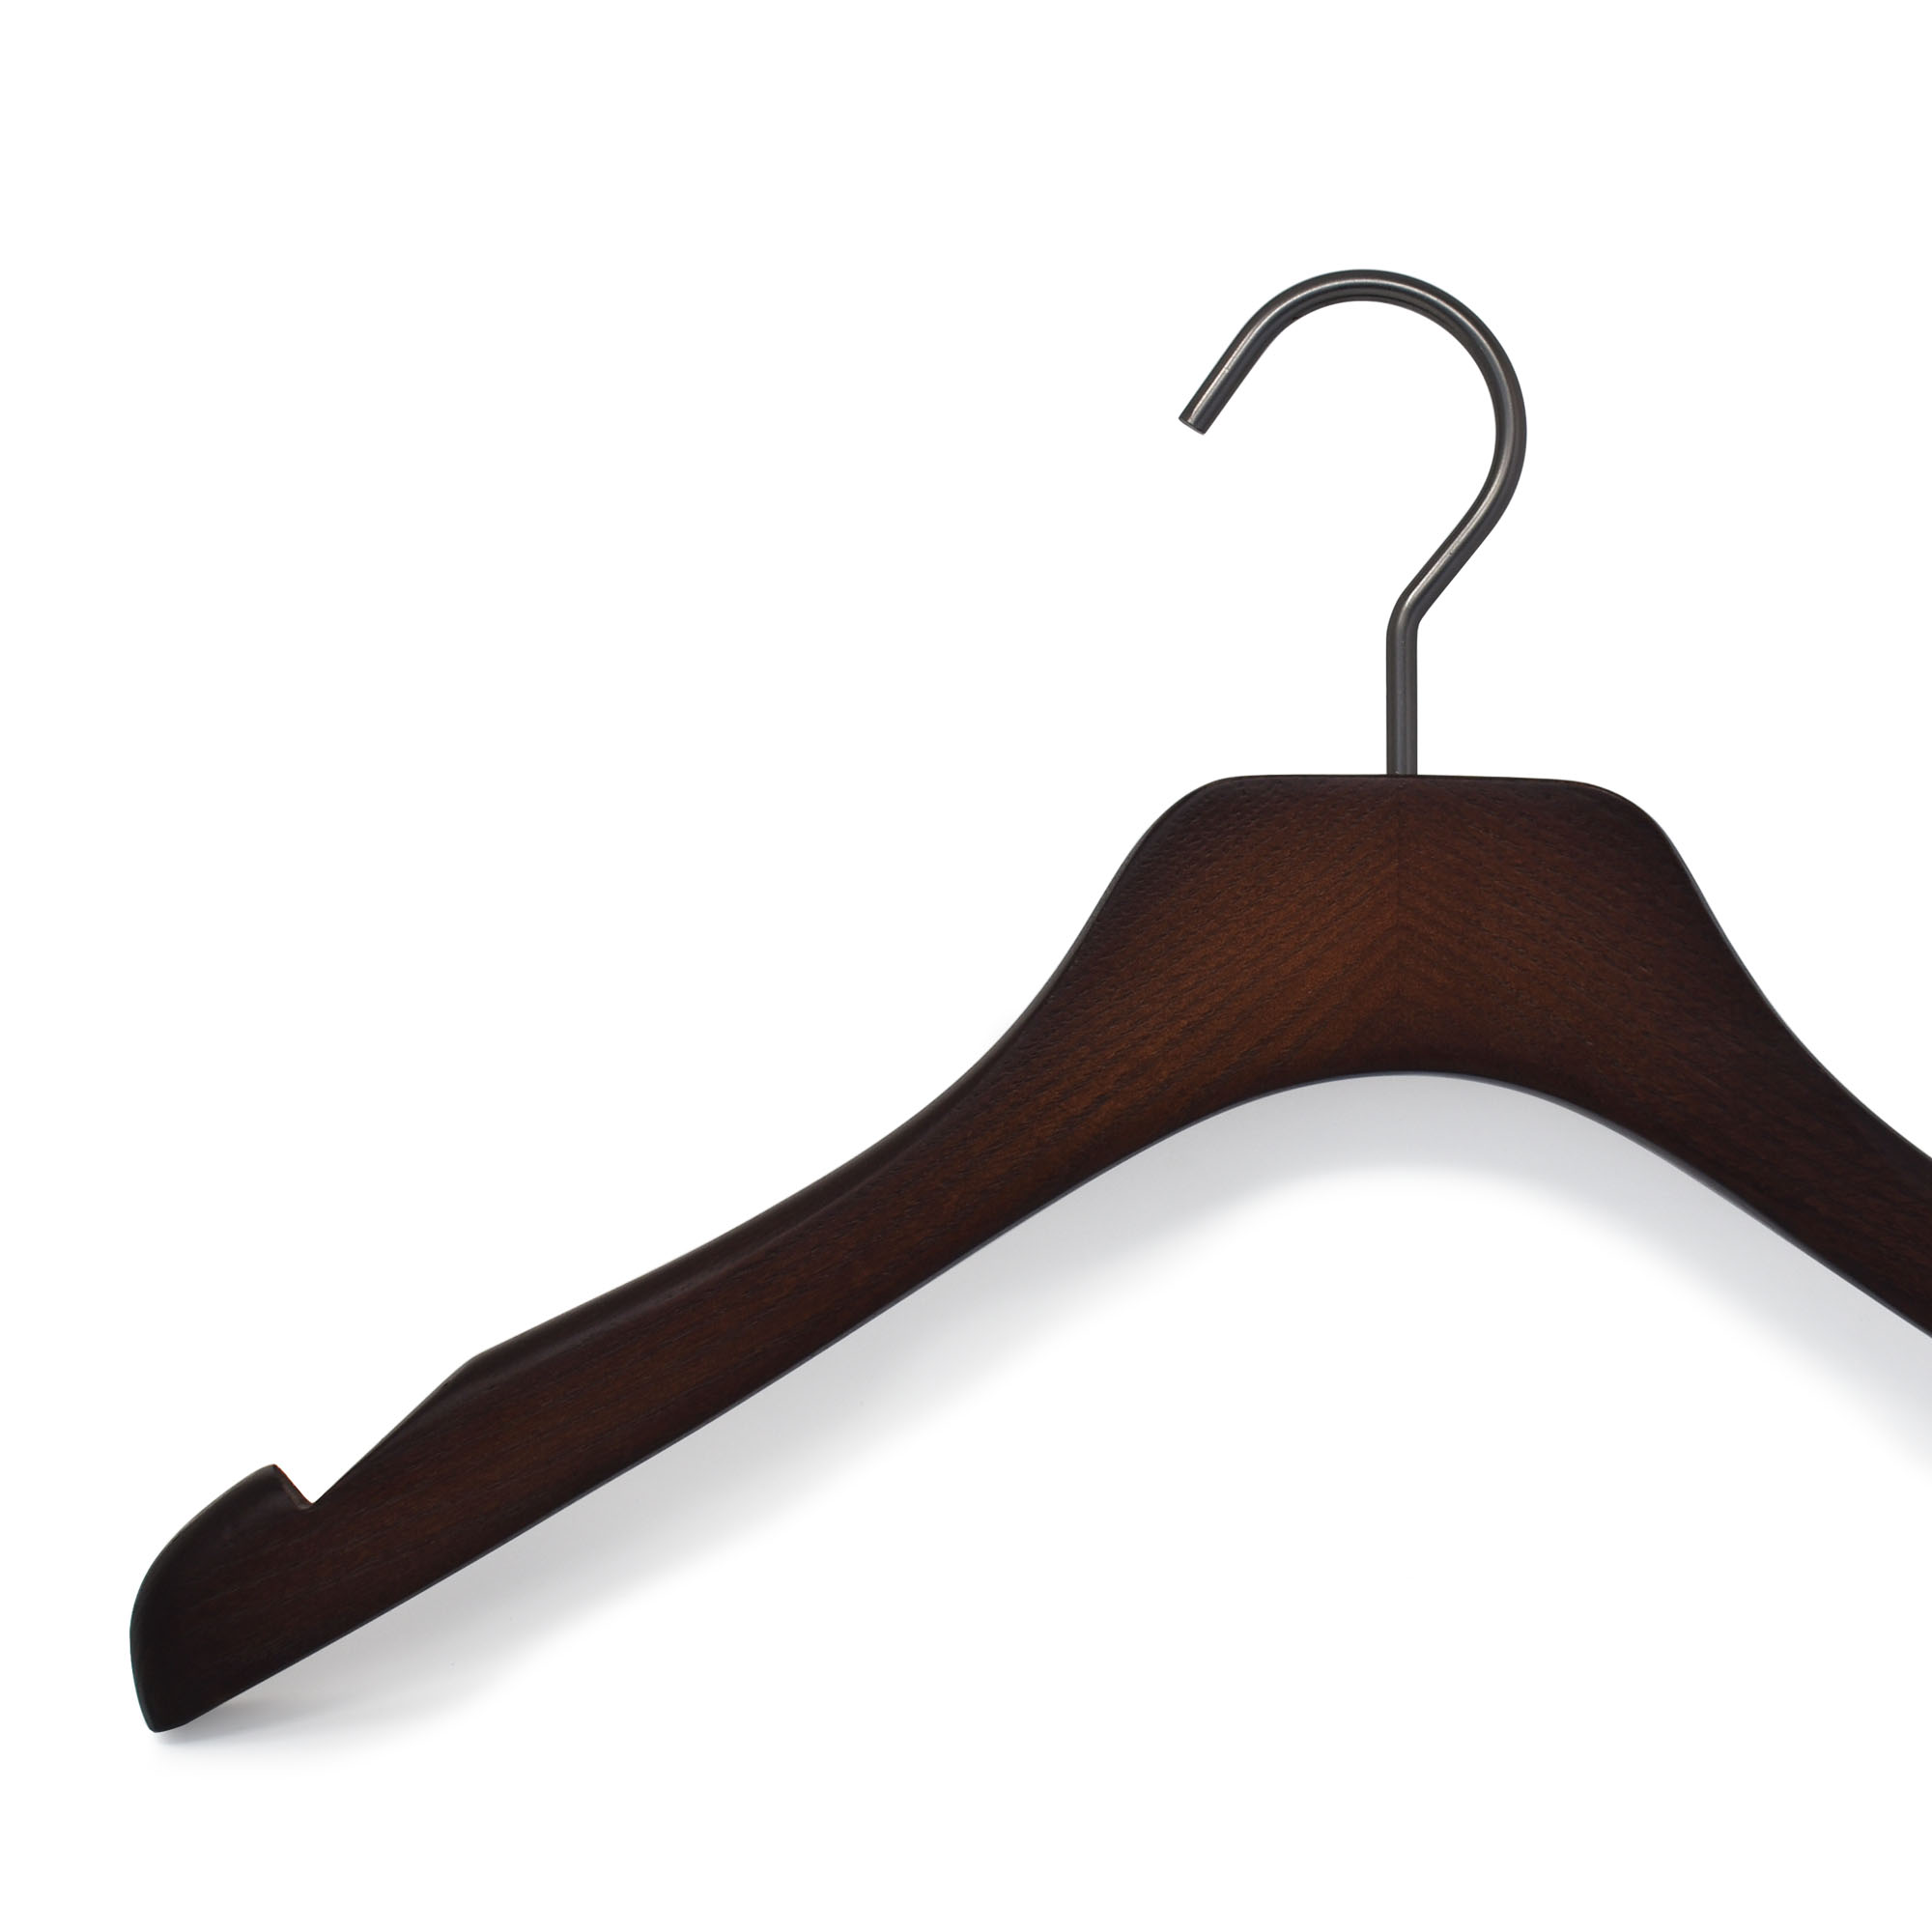 Hangers for women, in wood with notches, brown color